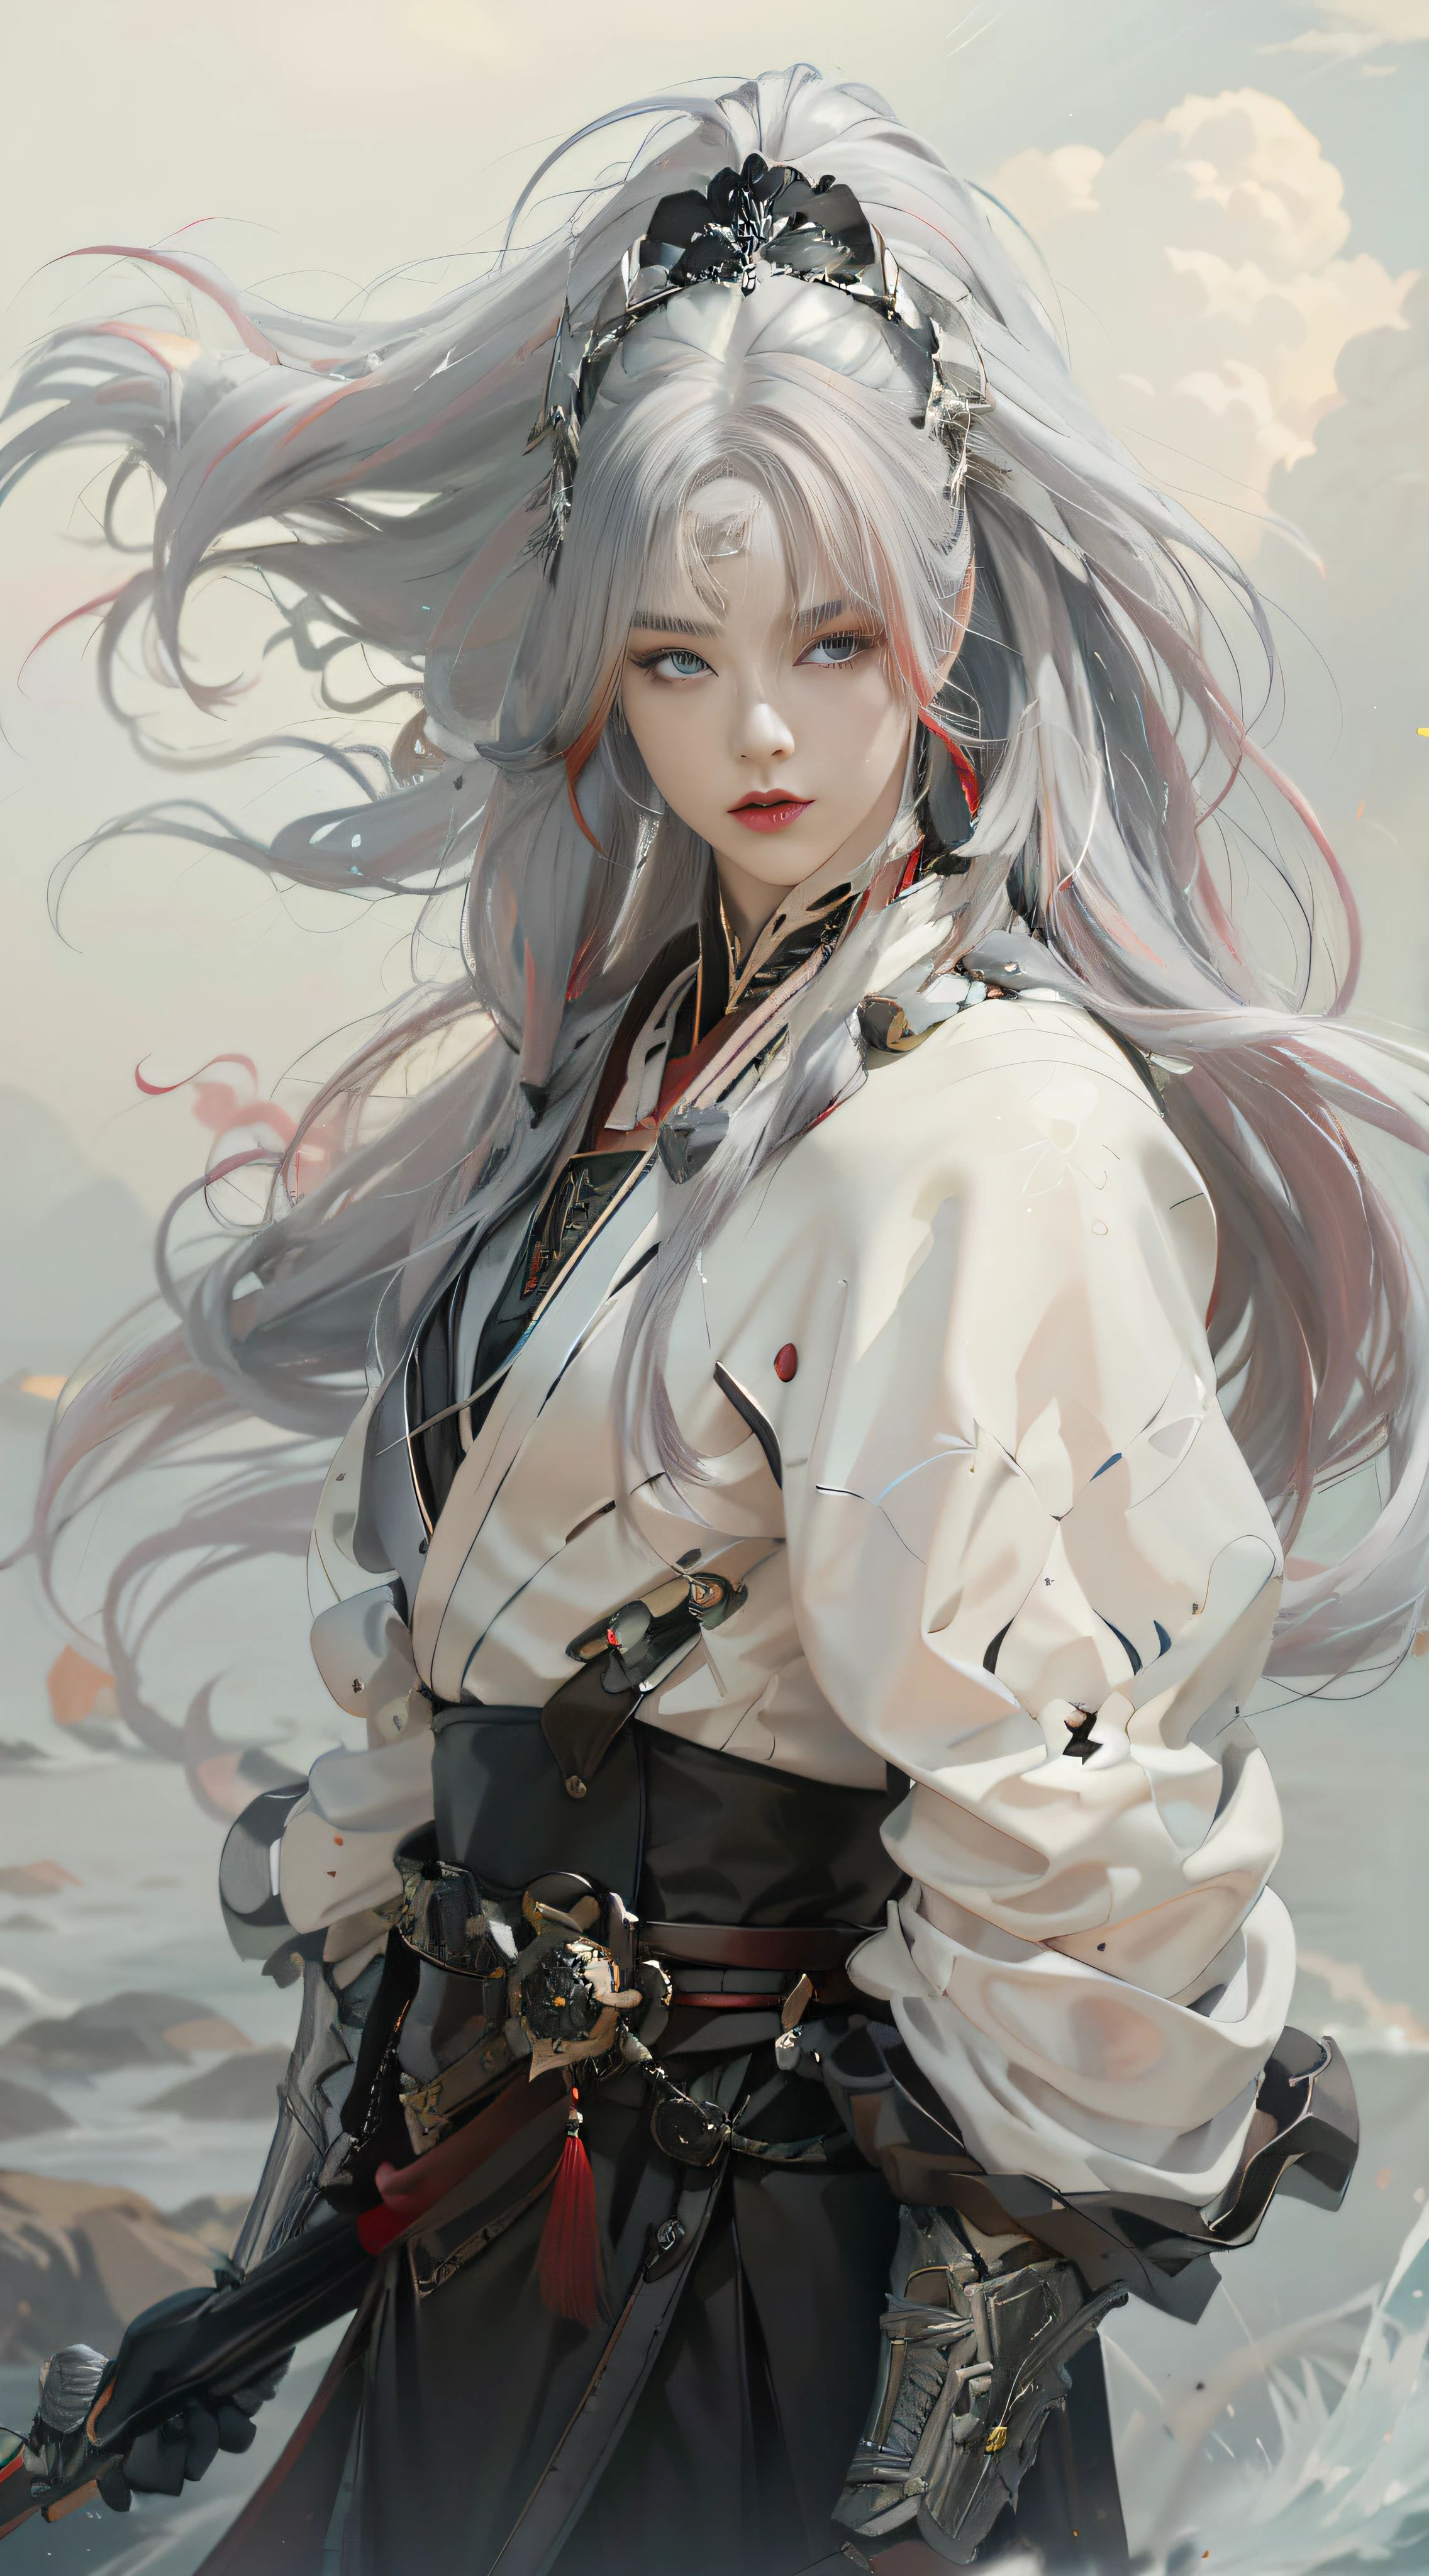 Close-up of a long-haired man holding a sword, Asian man, white Hanfu, black and white embroidery, red belt, red fringed hair ornament, black metal shoulder armor, black metal shoulder pads, handsome guy in art, long black hair, flowing hair and robes, beautiful character painting, red headdress, tassels, anime characters, detailed character art, male anime characters, black hair, flowing red hair, CG, 8k HD, movie quality,